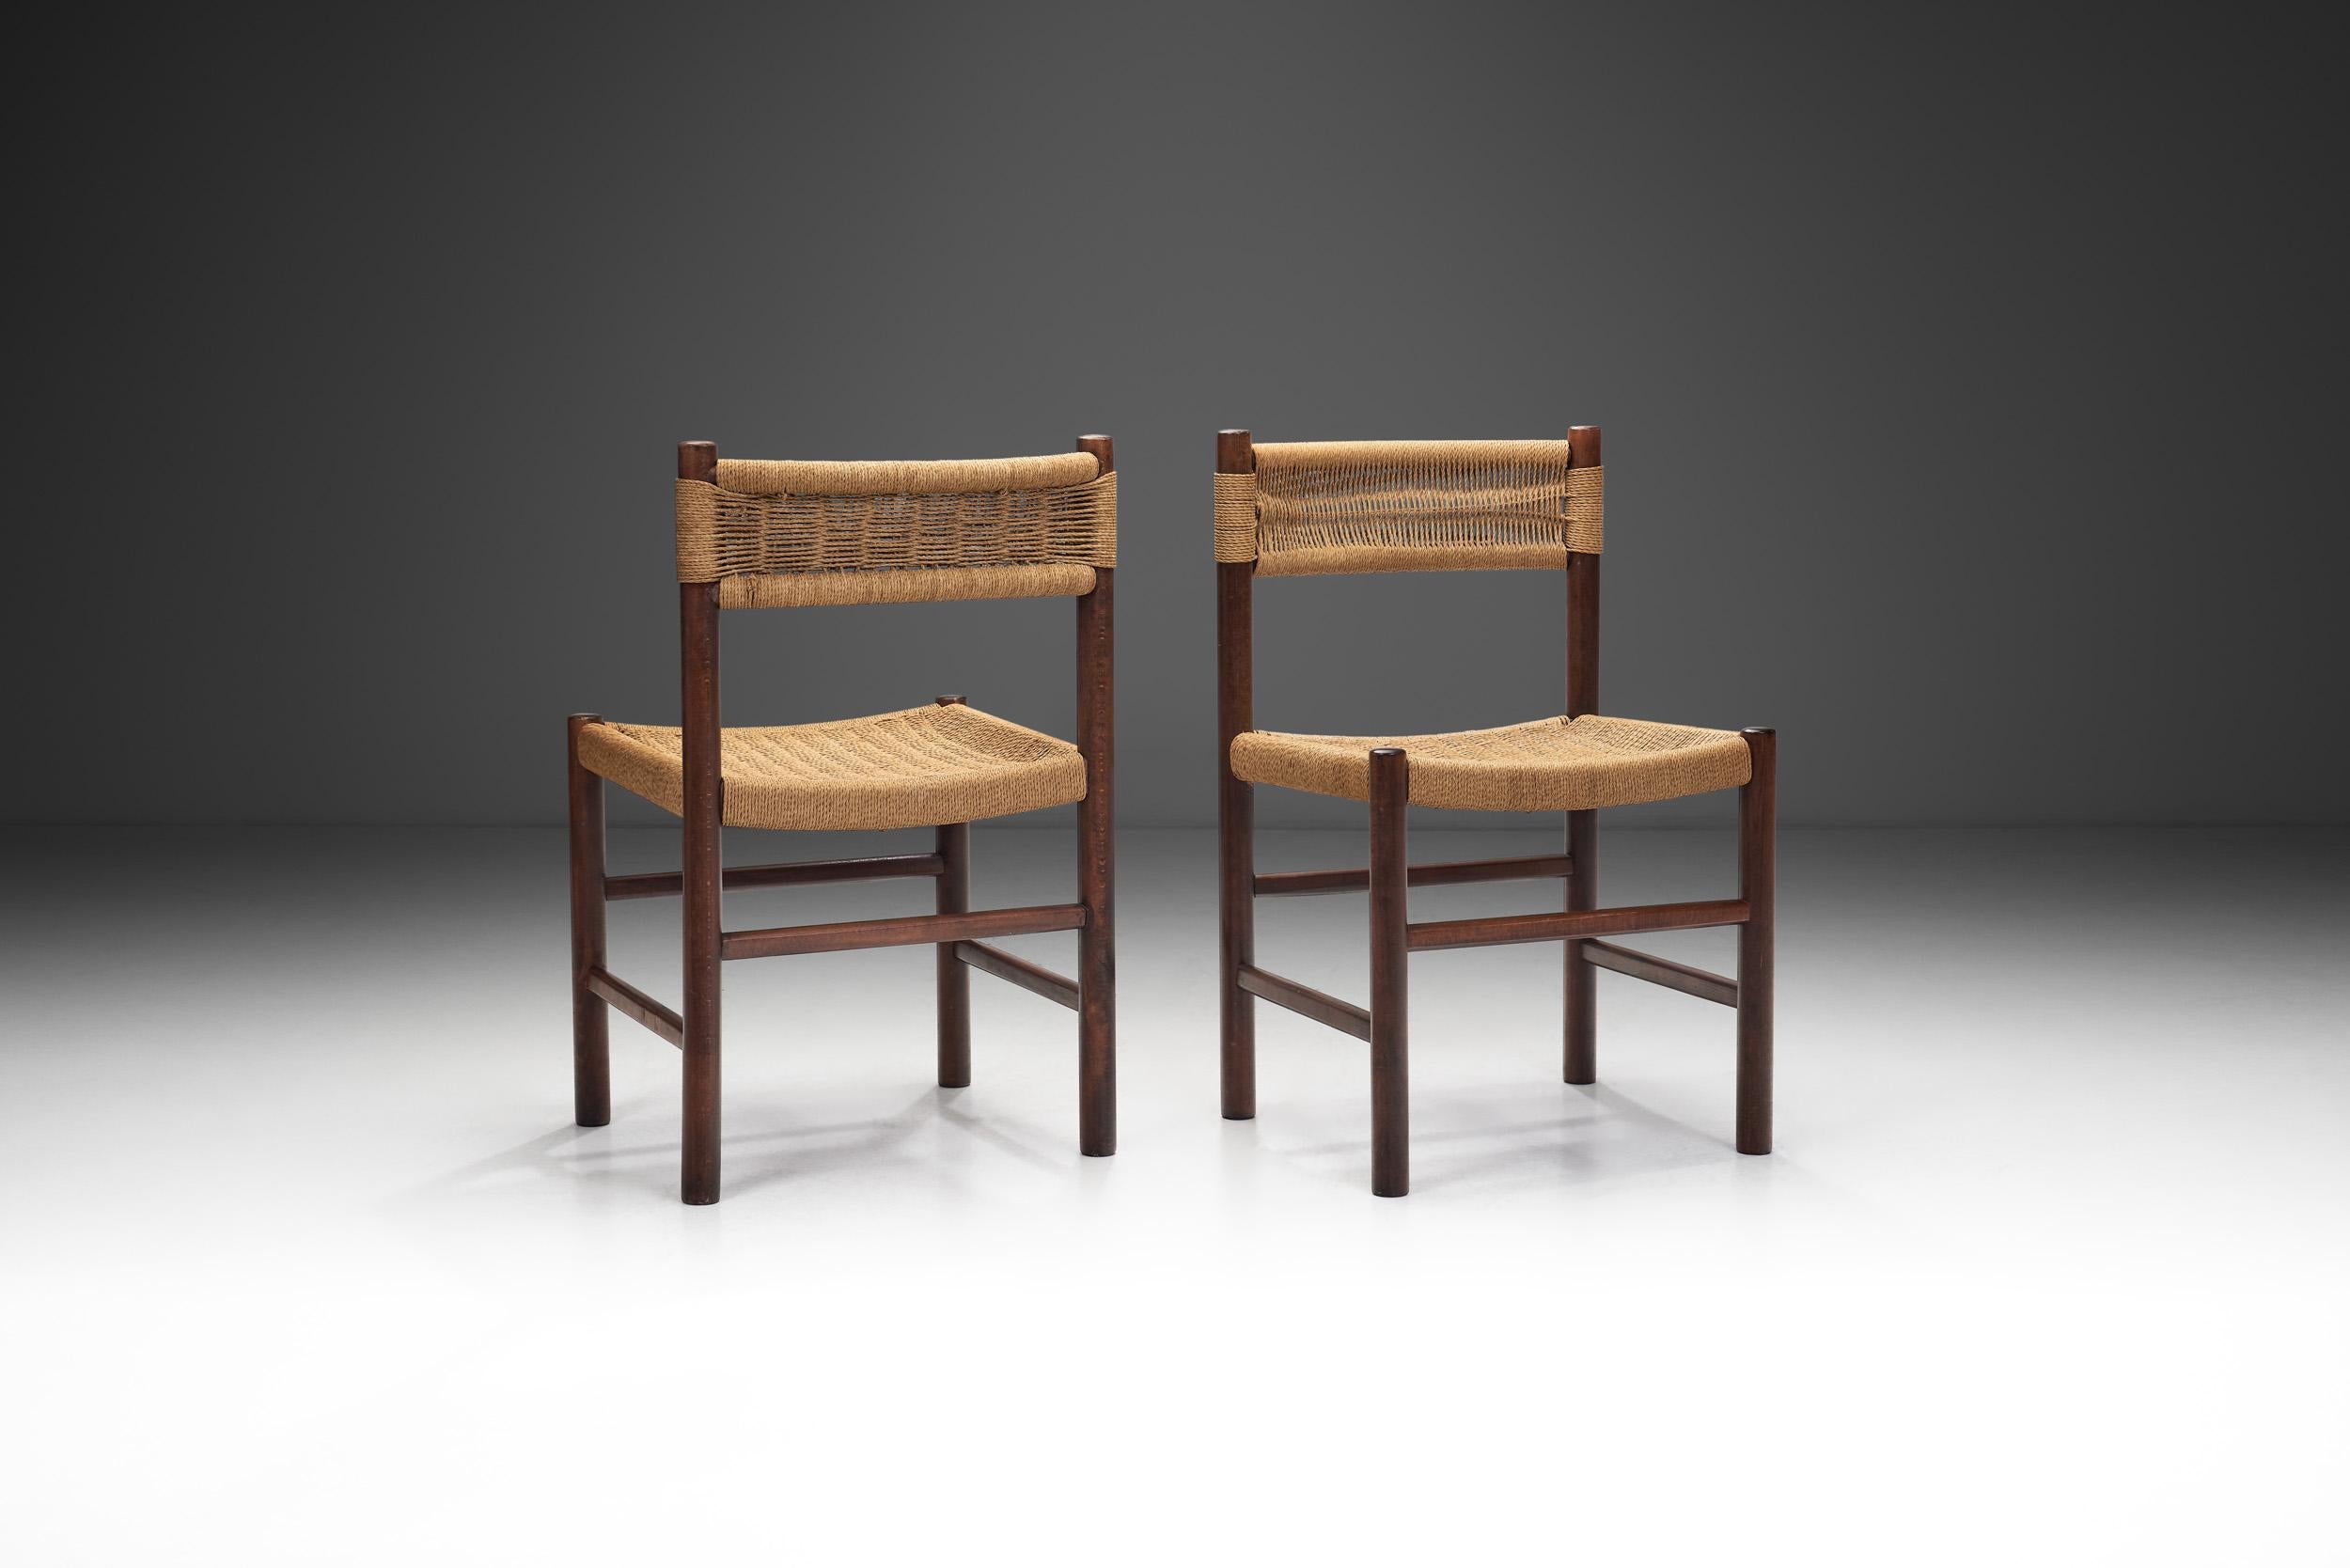 Mid-Century Modern “Dordogne” style Chairs with Woven Papercord Seats and Backs, Europe ca 1960s